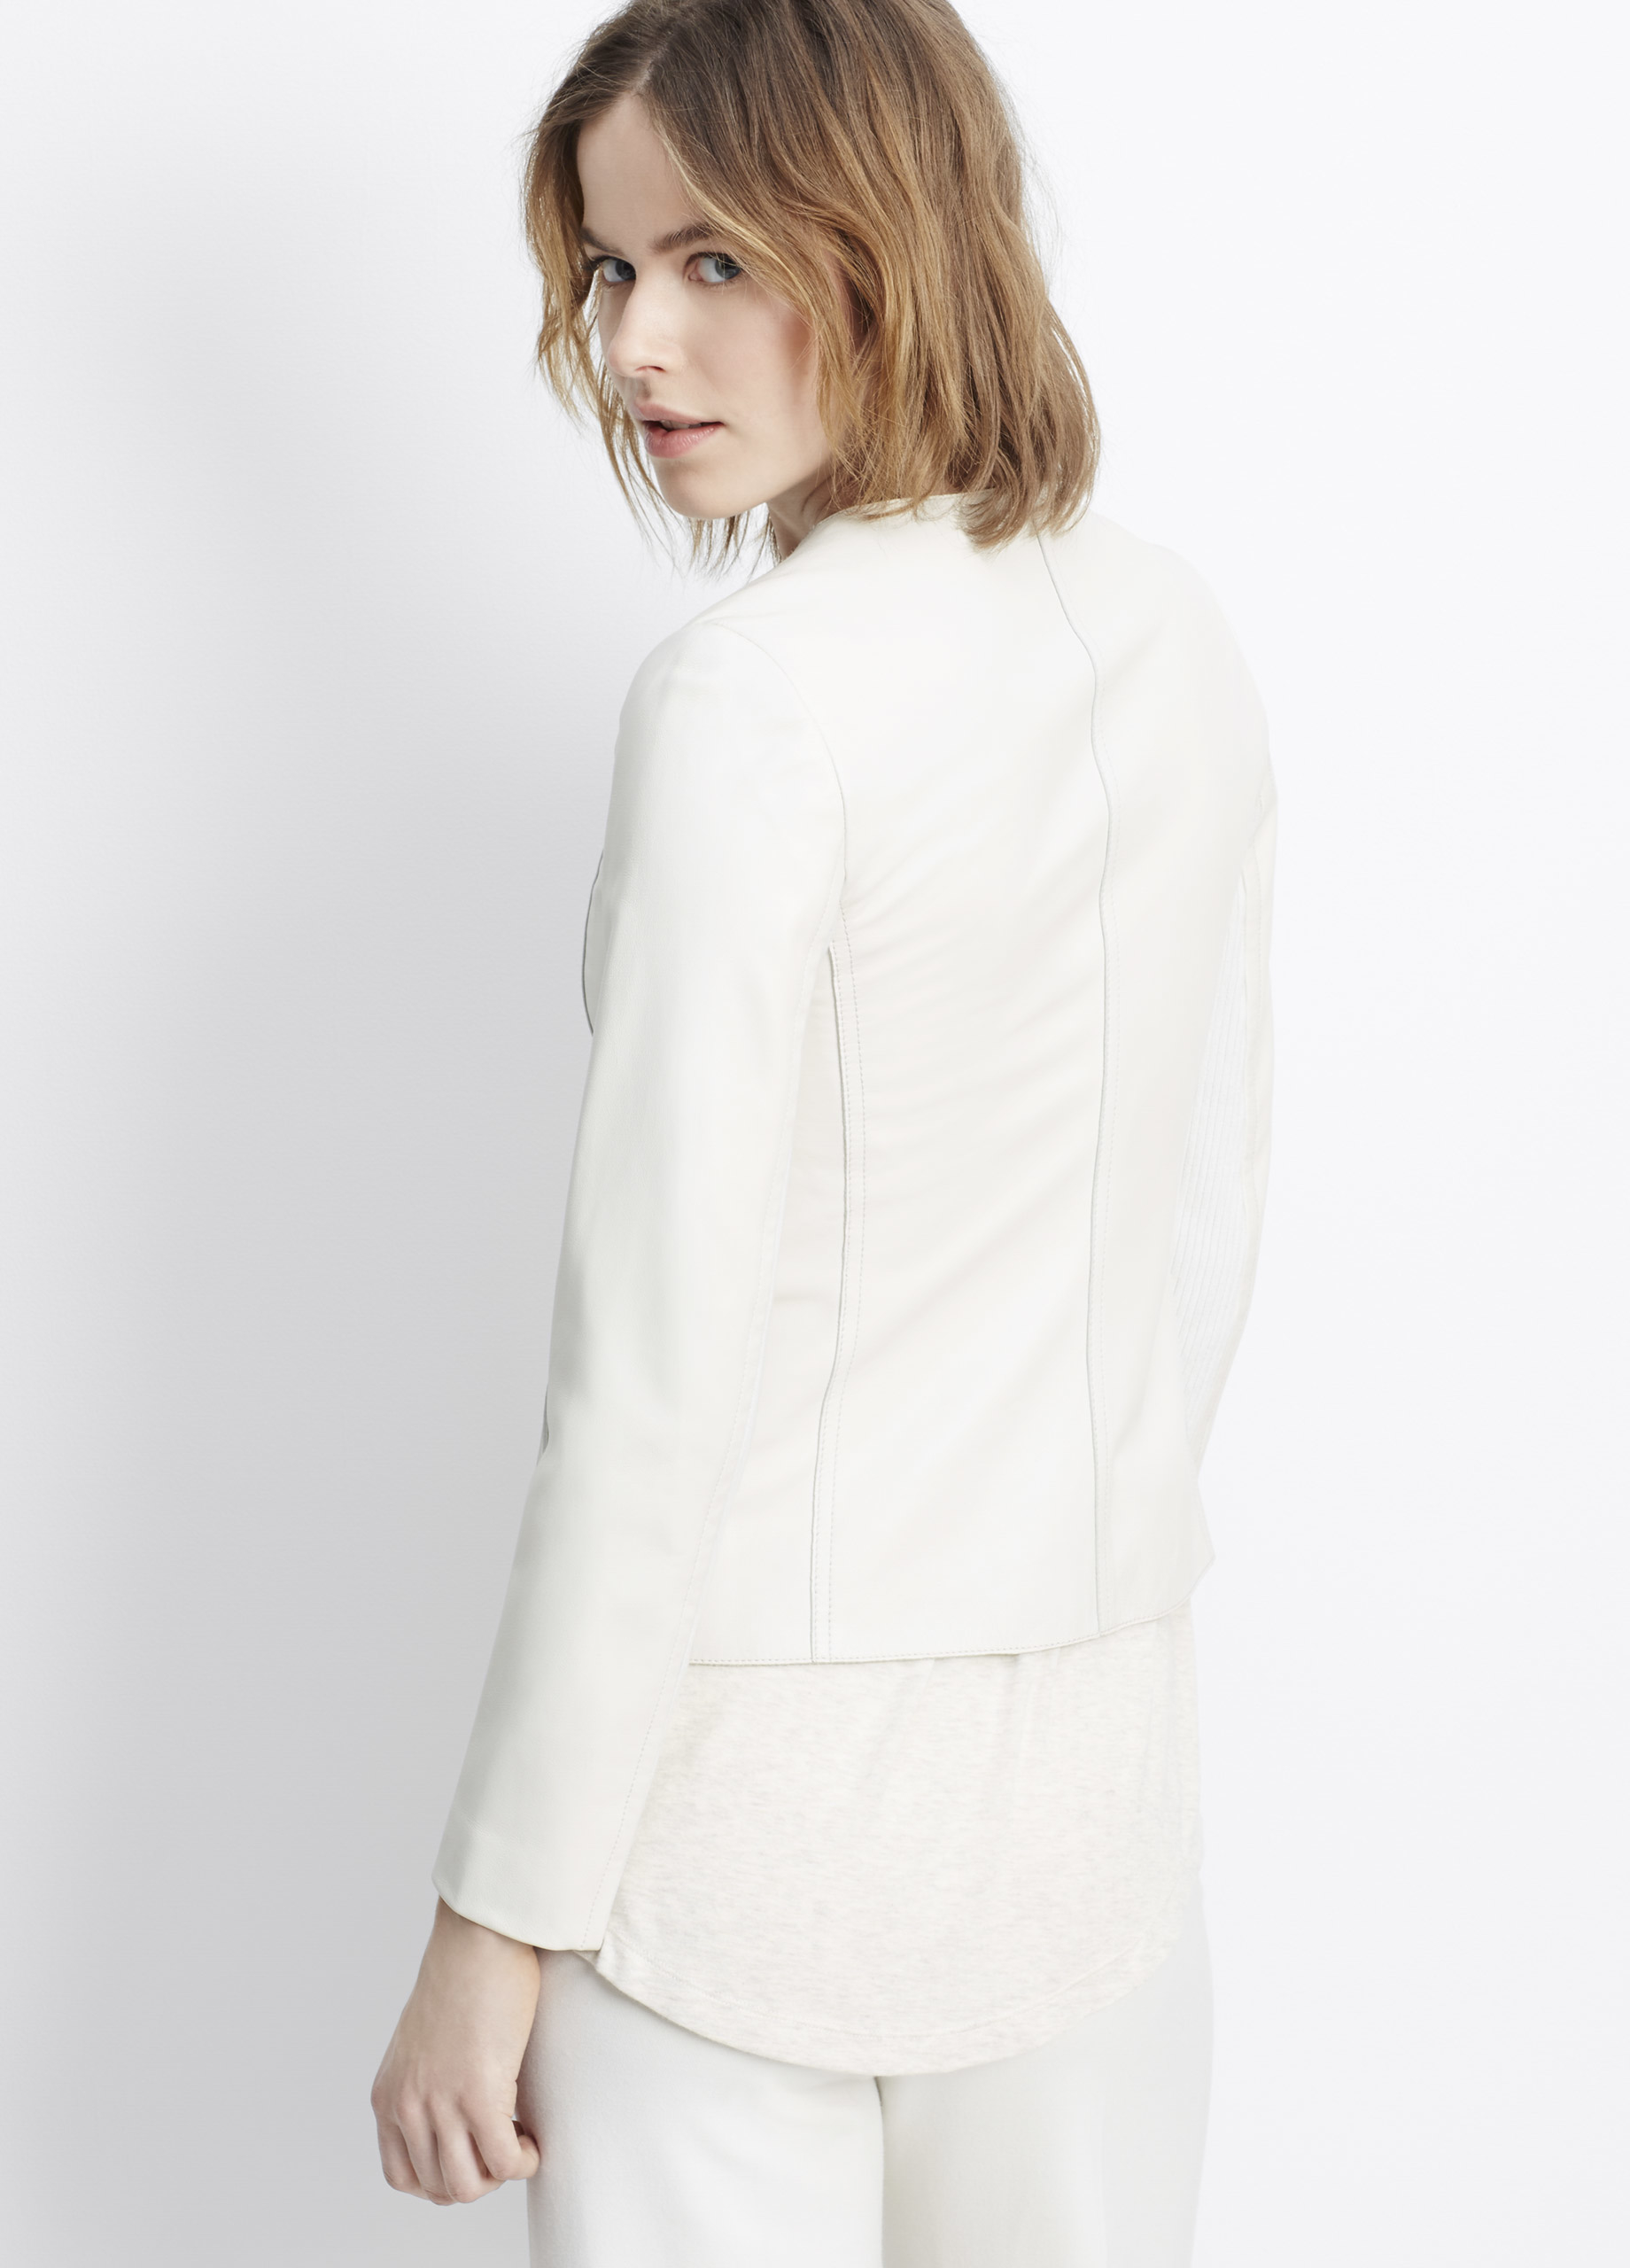 Vince Tailored Collarless Leather Jacket in White - Lyst